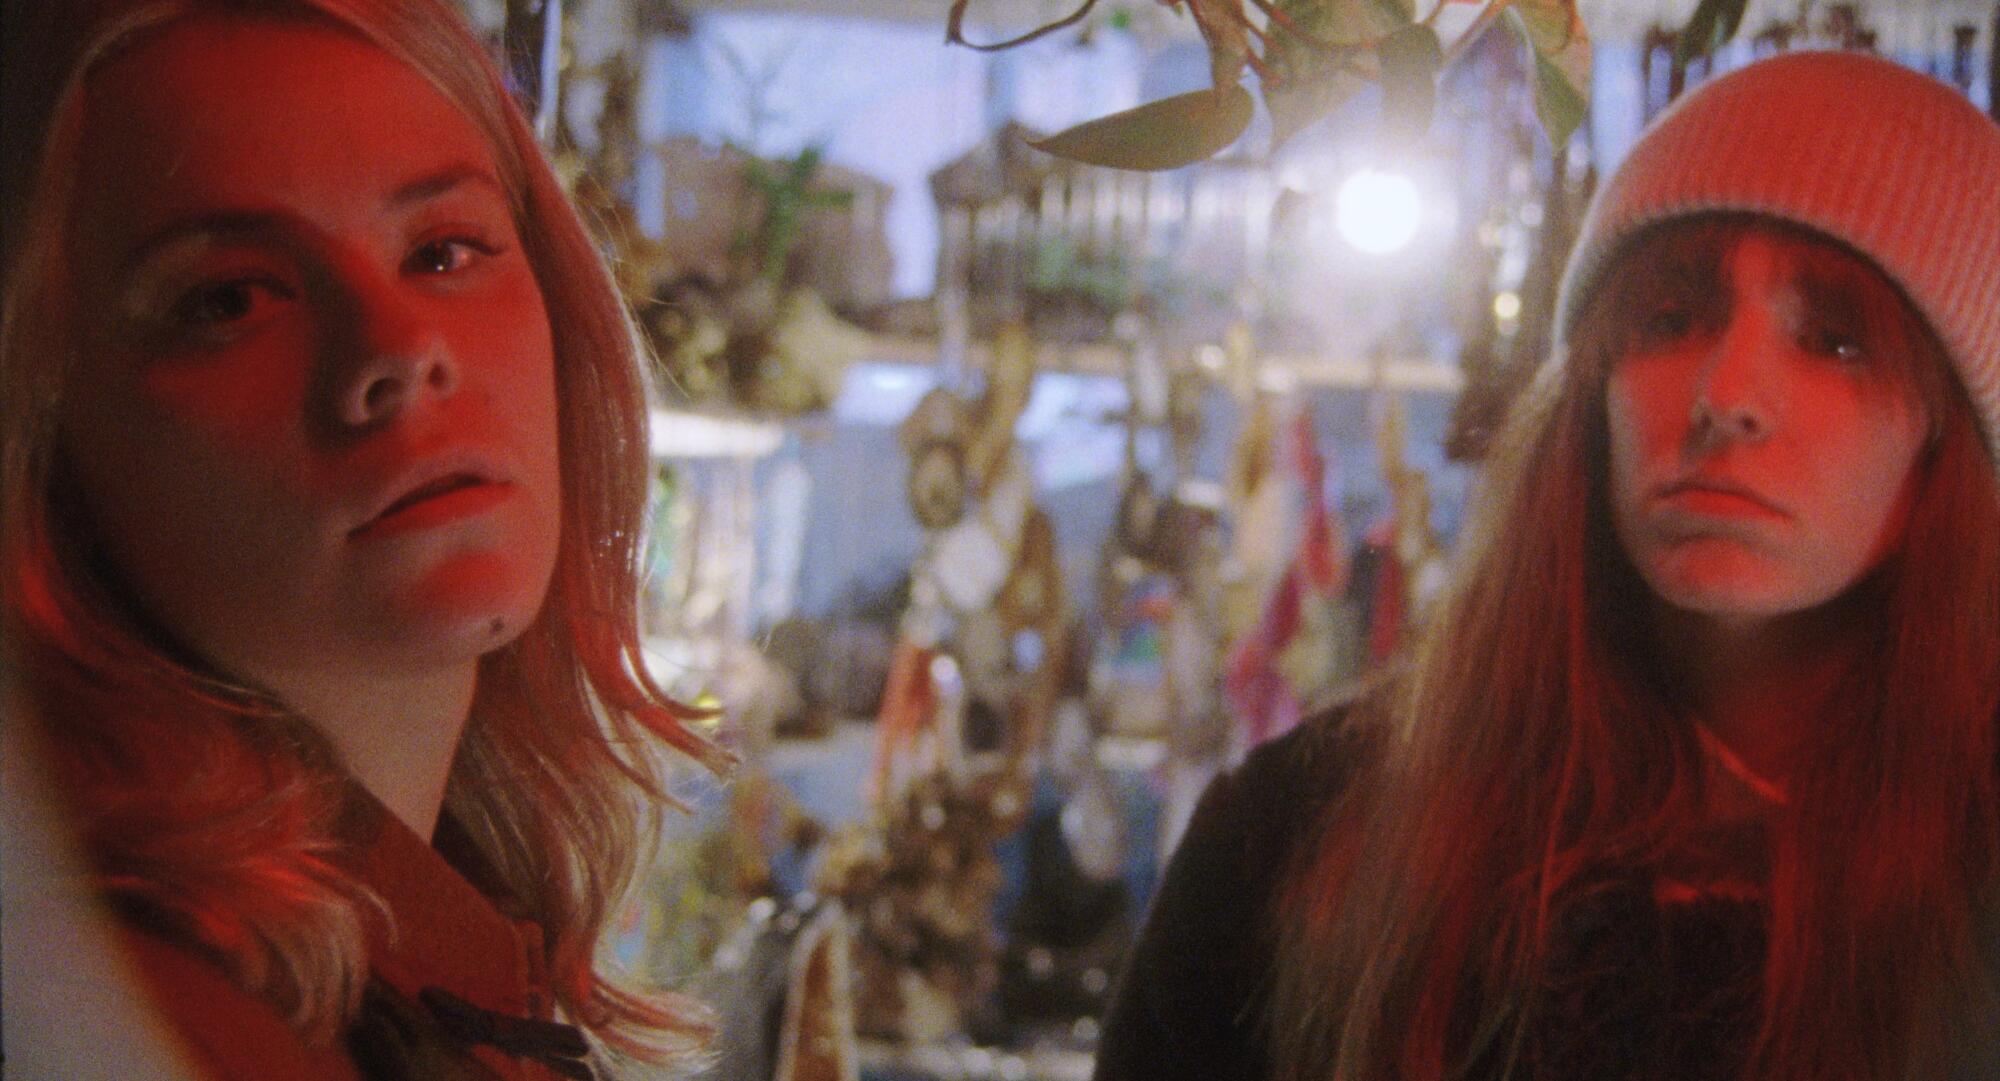 Dasha Nekrasova and Madeline Quinn in a scene from the film.